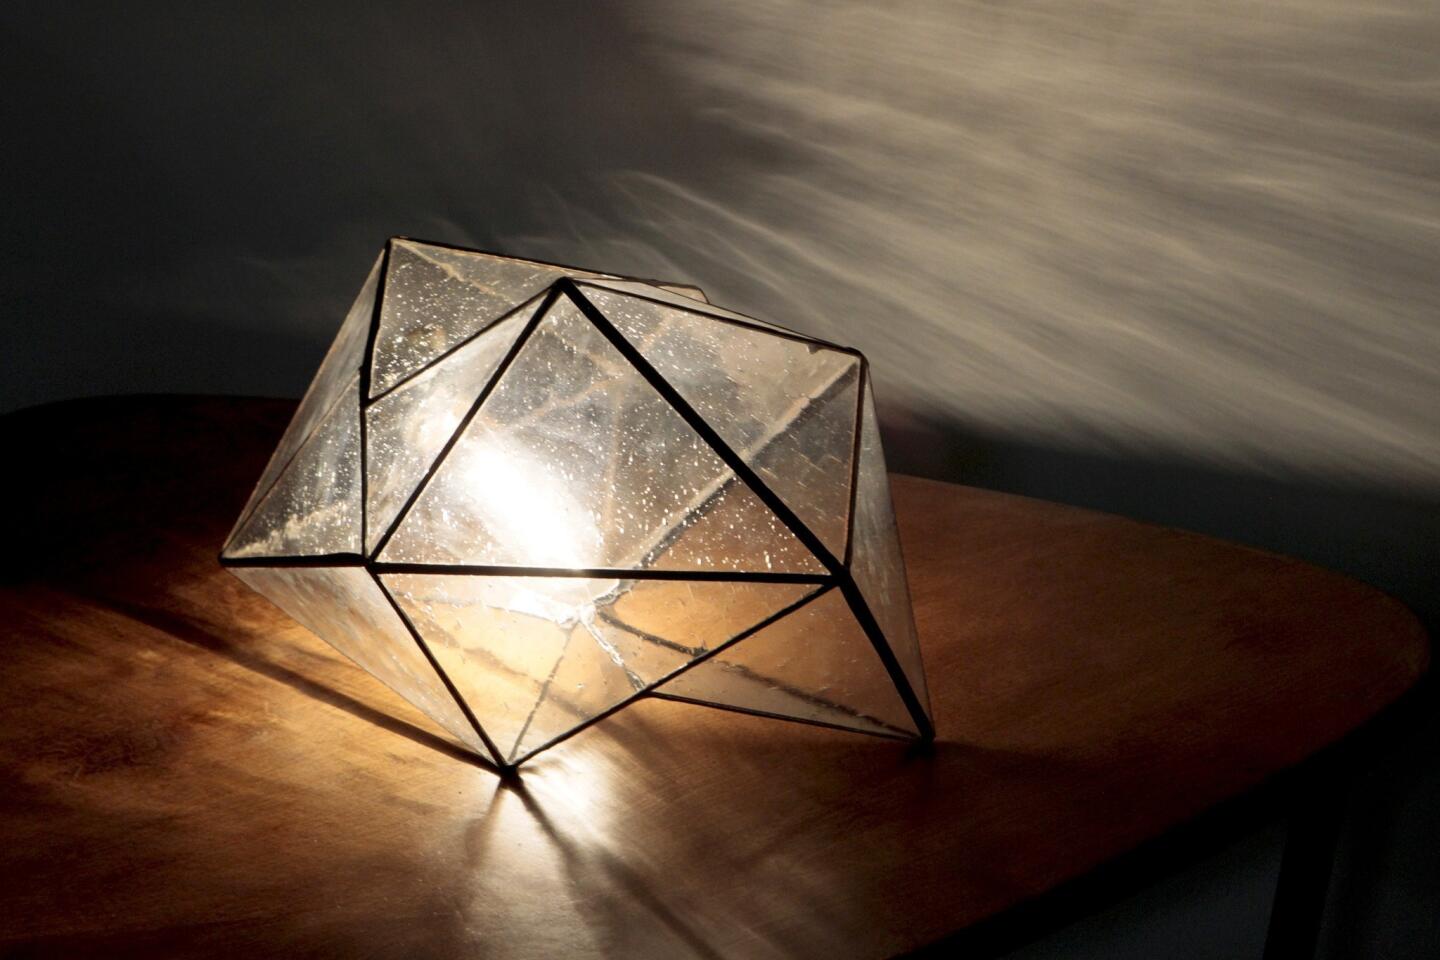 Koharik's prototype for the Geometric lamp made with seeded glass sells for $550. "It can be used as a table lamp or a pendant," the designer says, "and I also like to use them on the floor to fill dark corners of a room."